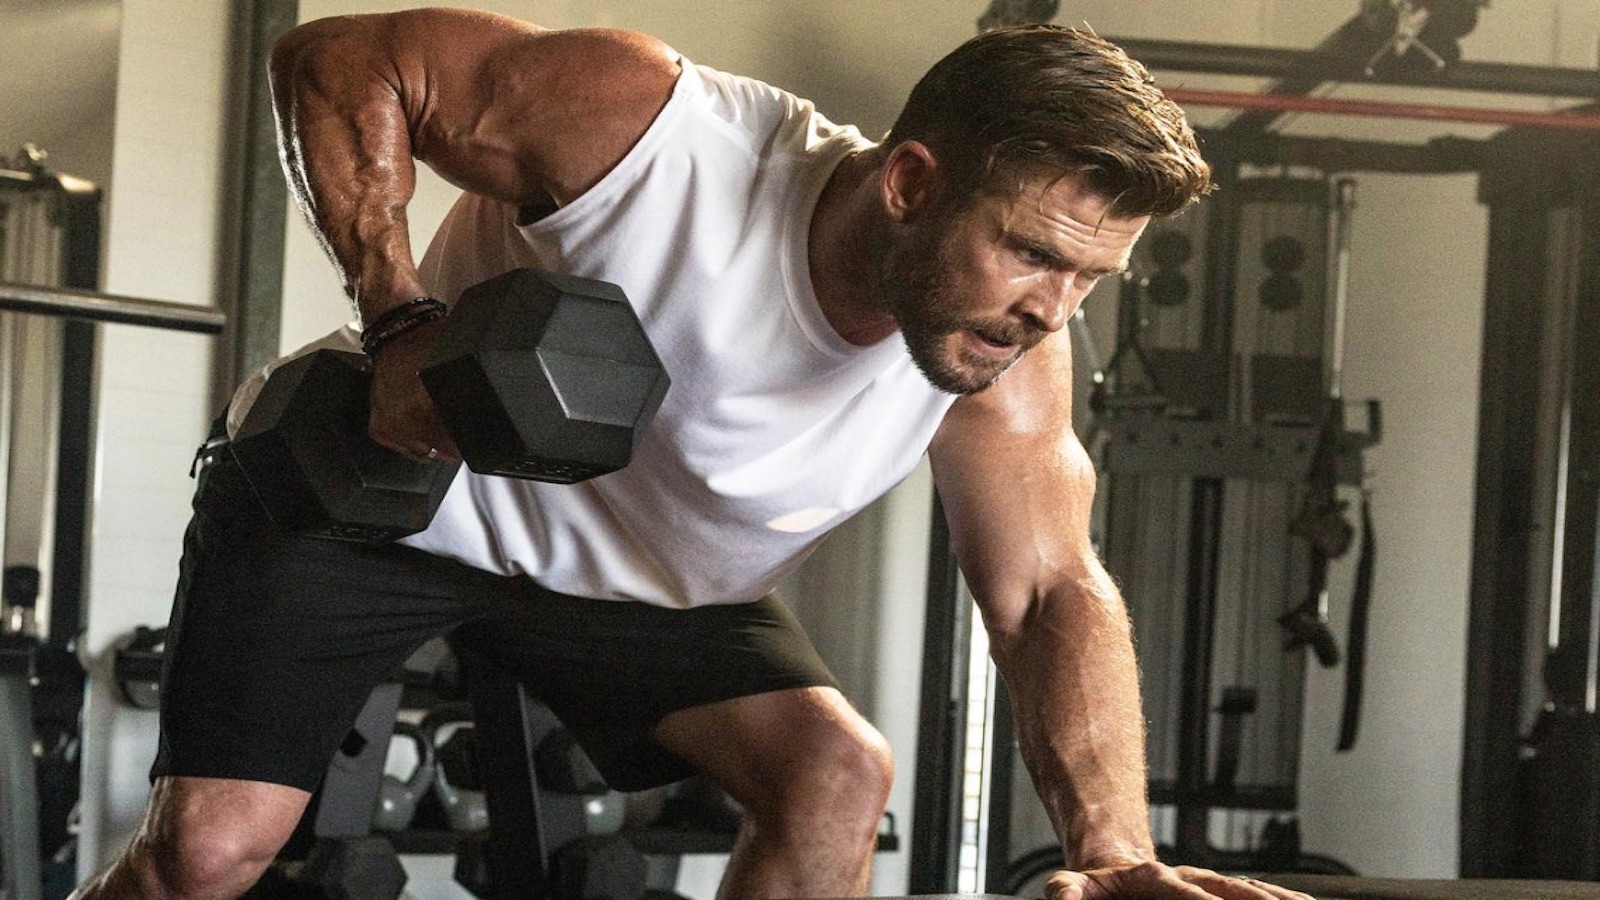 Tonic River Chris Hemsworth Diagrams a Killer Upper Body Workout Fit For an Action Star